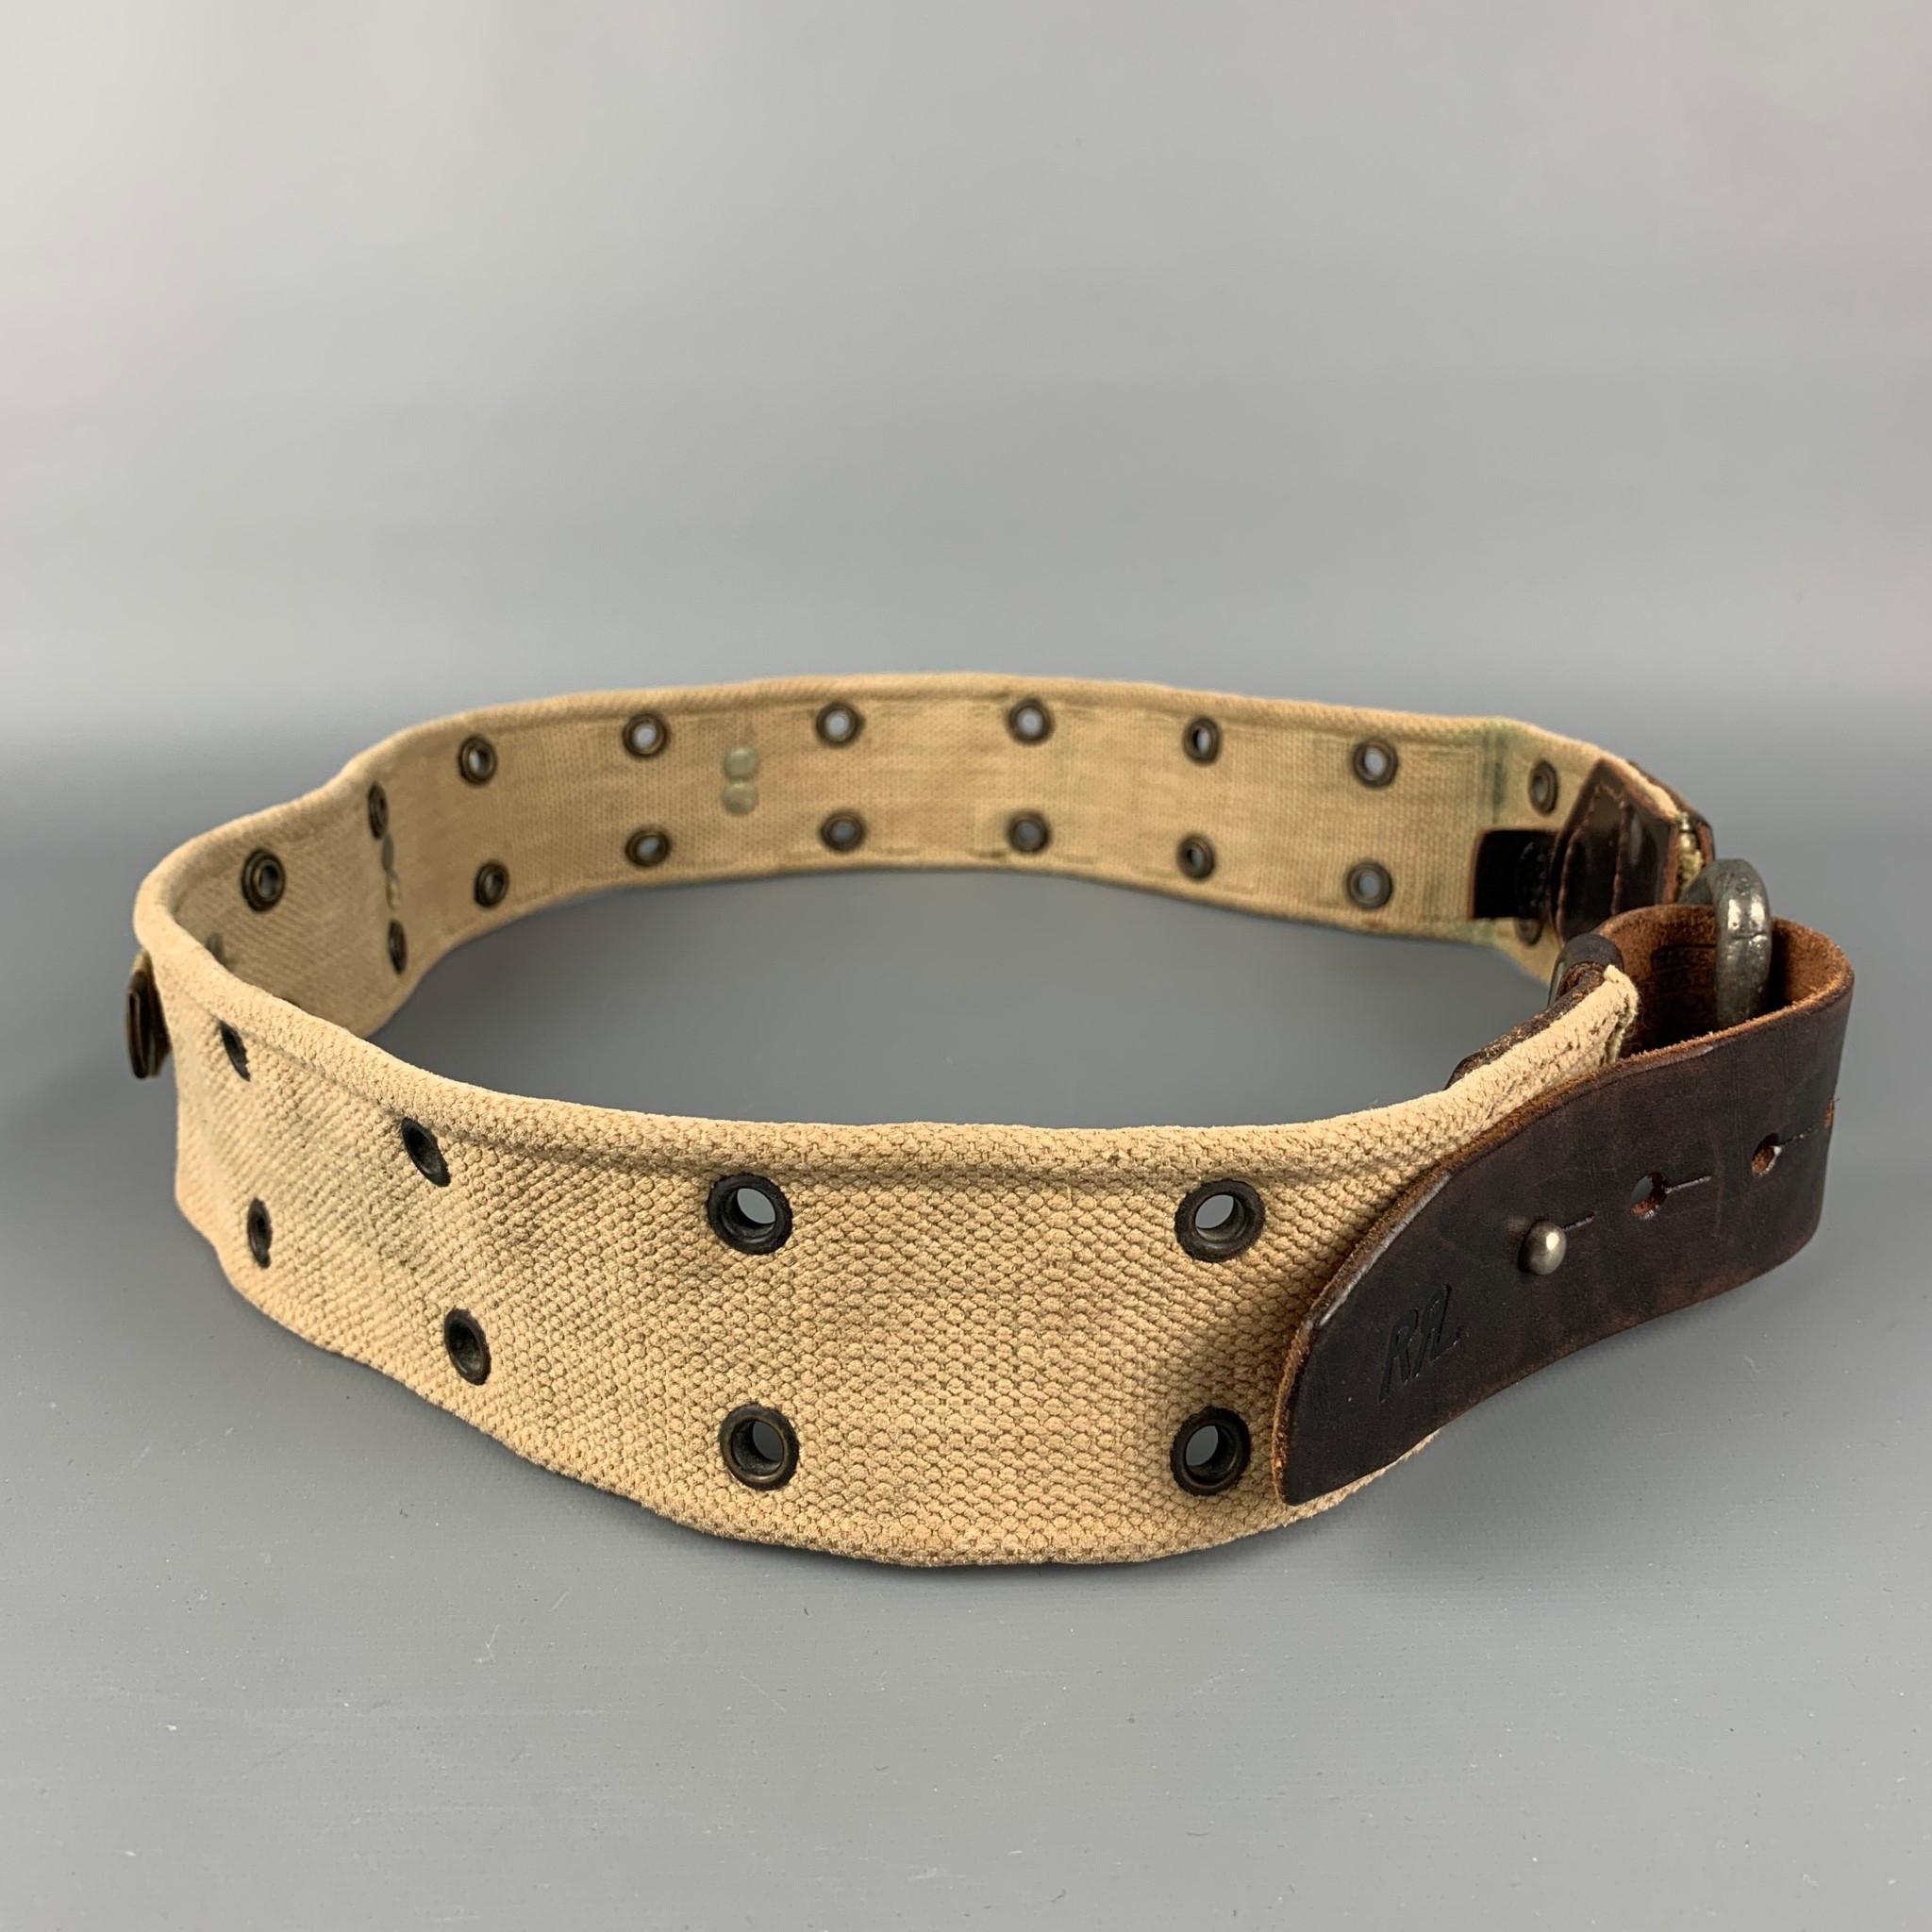 RRL by RALPH LAUREN belt comes in a brown & khaki distressed canvas featuring a leather trim, grommet details, back strap design, and a silver tone buckle. Made in USA. 

Very Good Pre-Owned Condition.
Marked: 34

Length: 45 in.
Width: 2 in.
Fits: